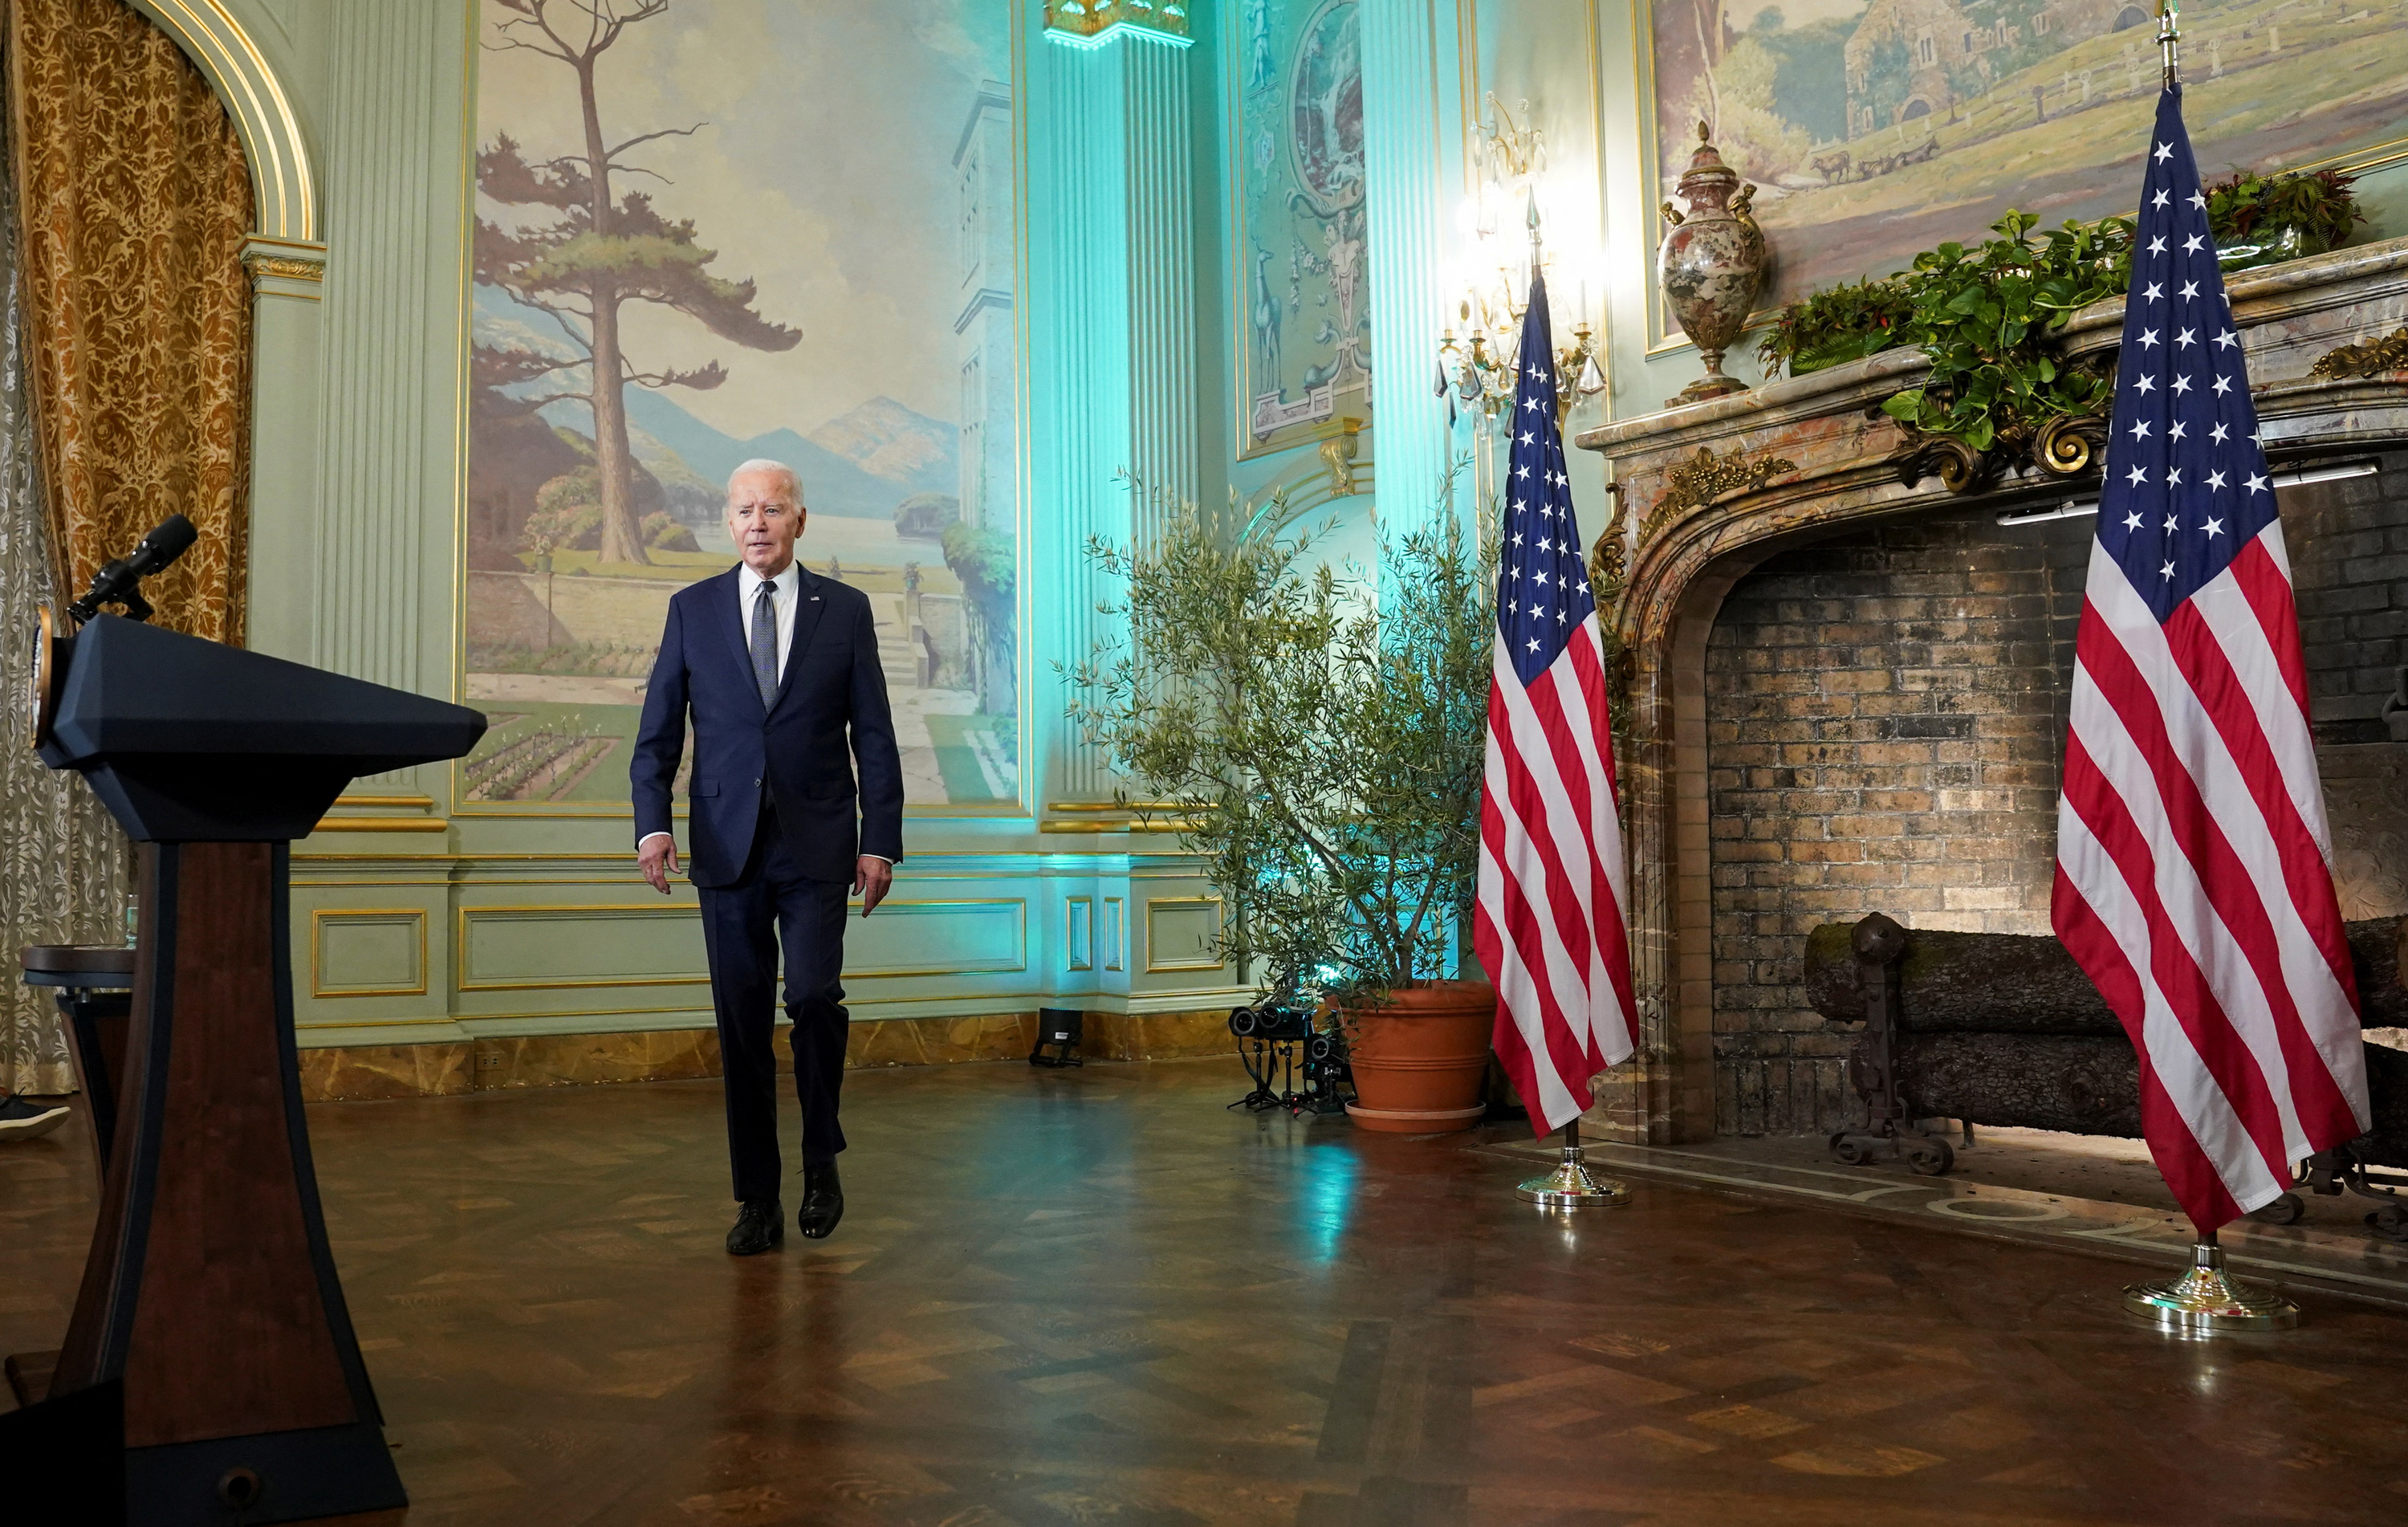 US President Joe Biden walks to attend a press conference about his meeting with Chinese President Xi Jinping before the start of the Asia-Pacific Economic Cooperation (APEC) summit in Woodside, California, on November 15.